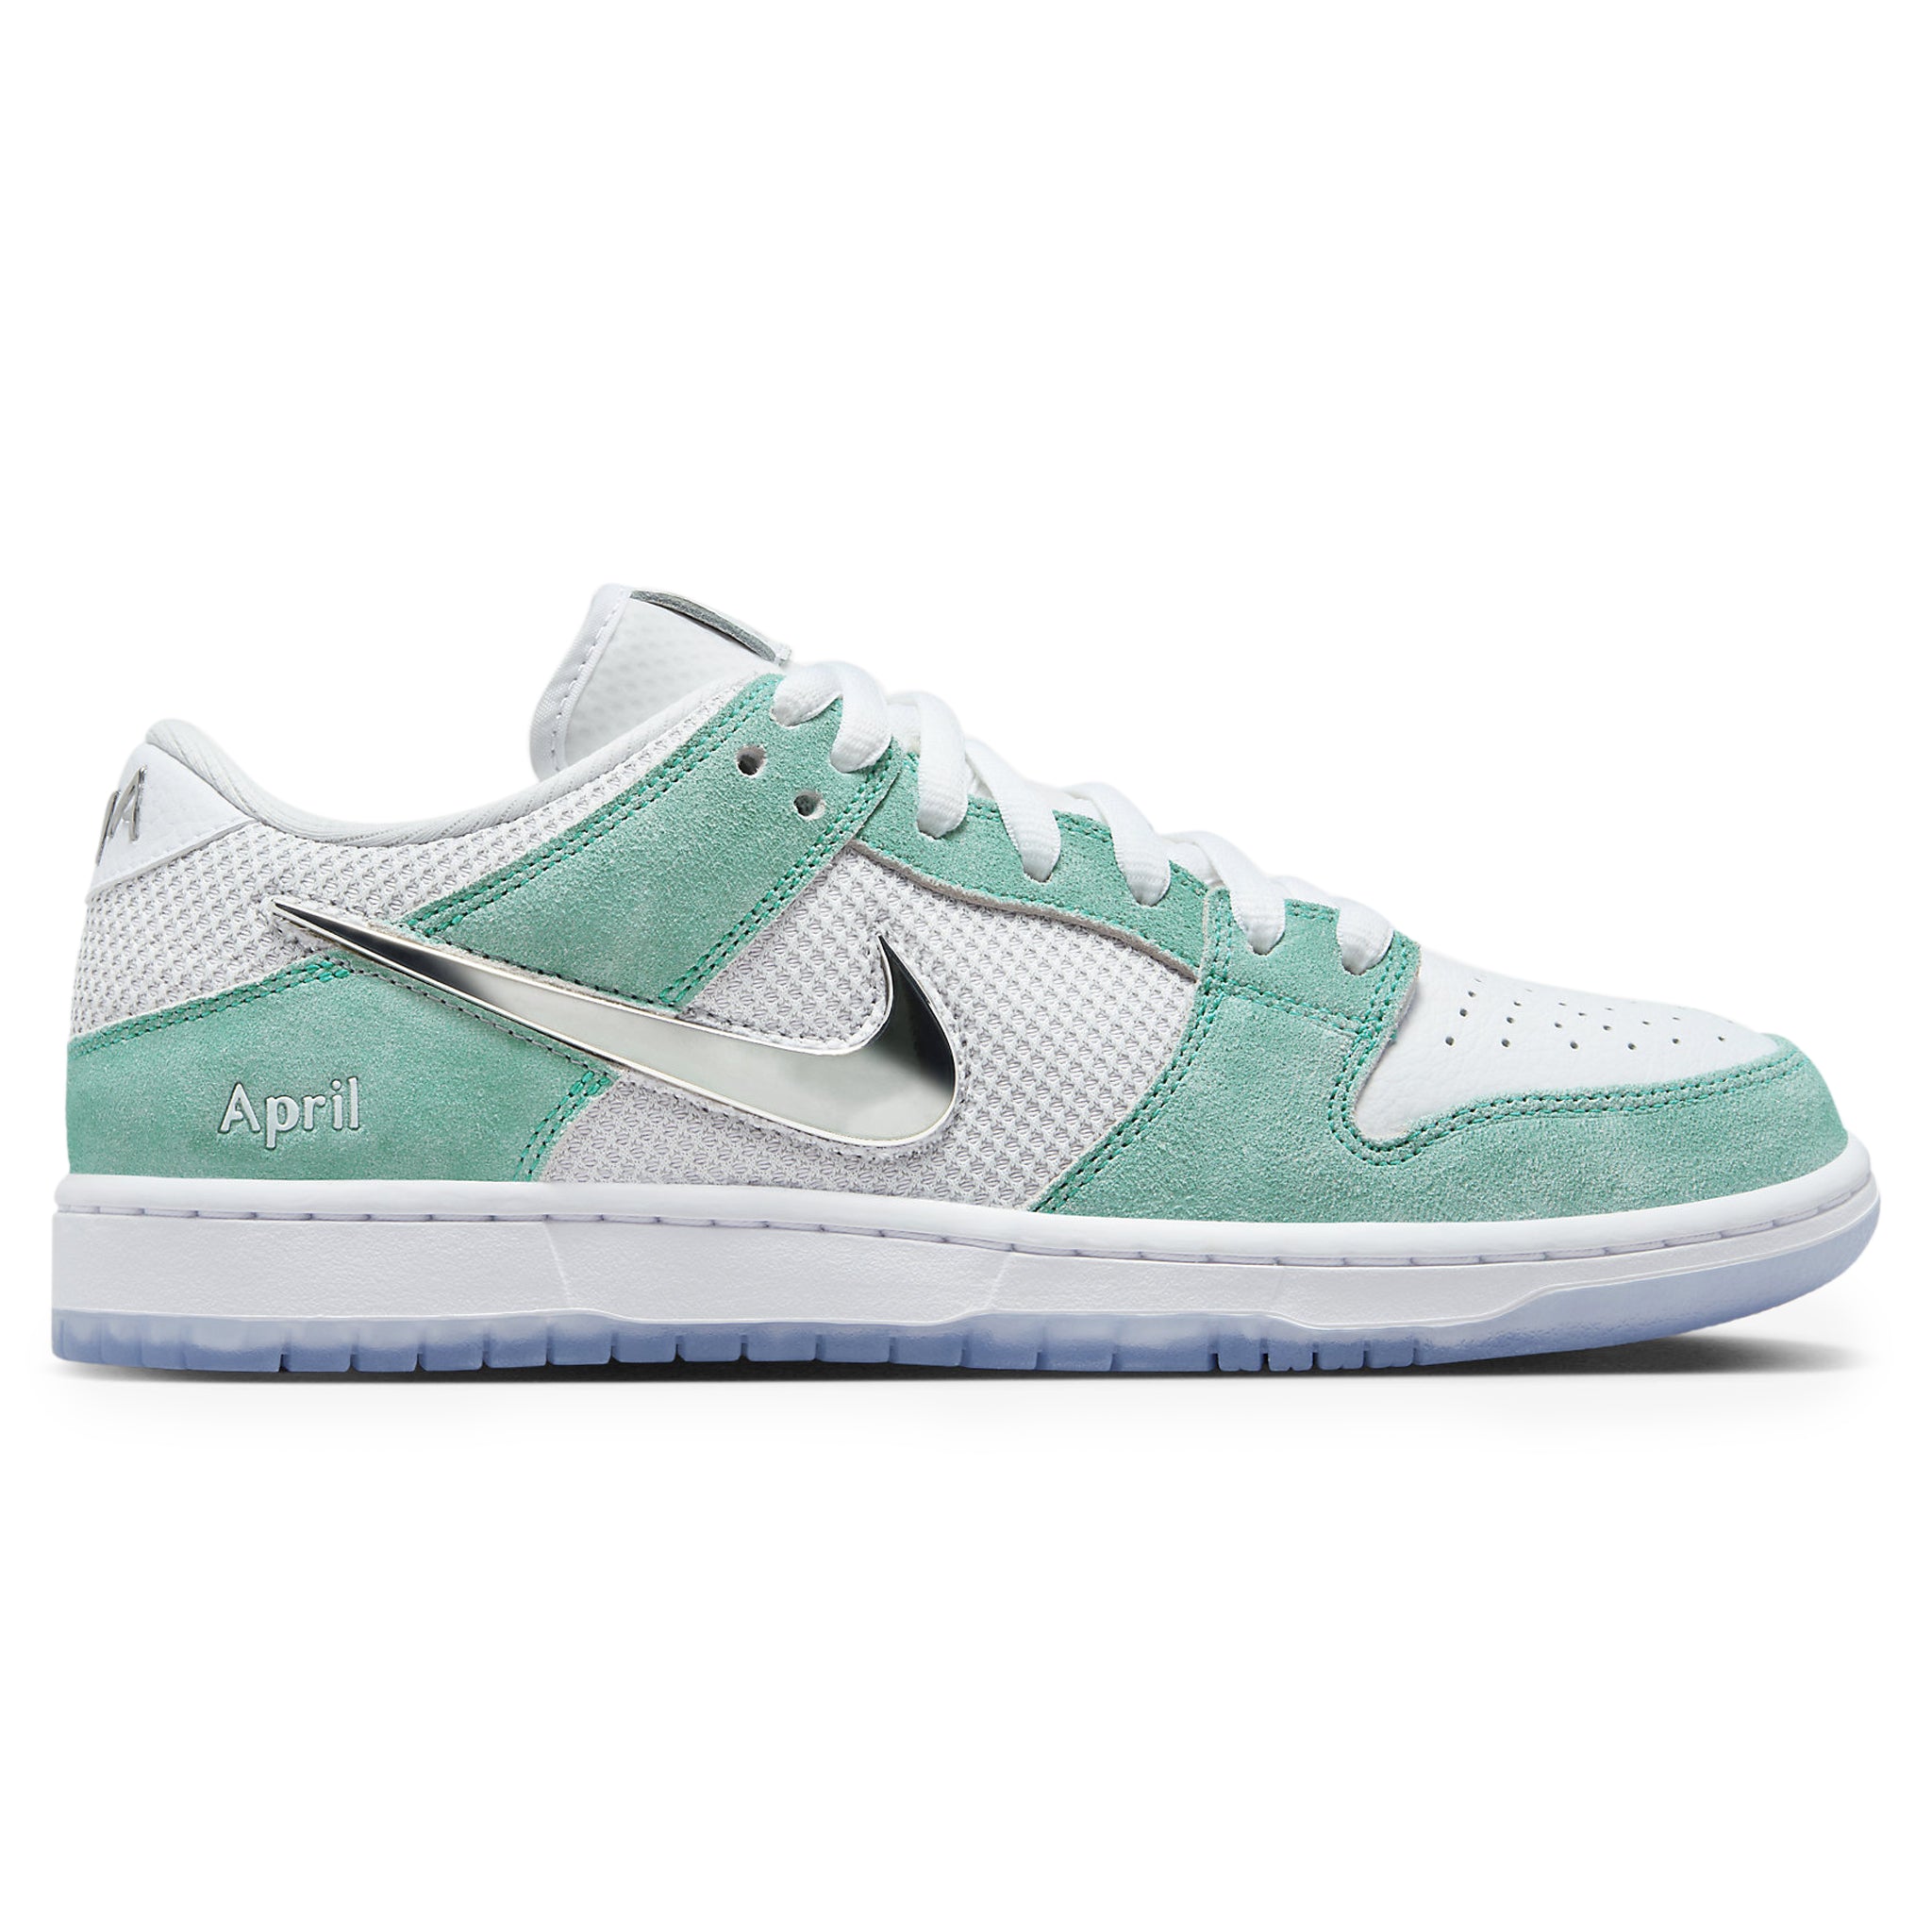 Side view of April Skateboards x Nike SB Dunk Low Turbo Green FD2562-400